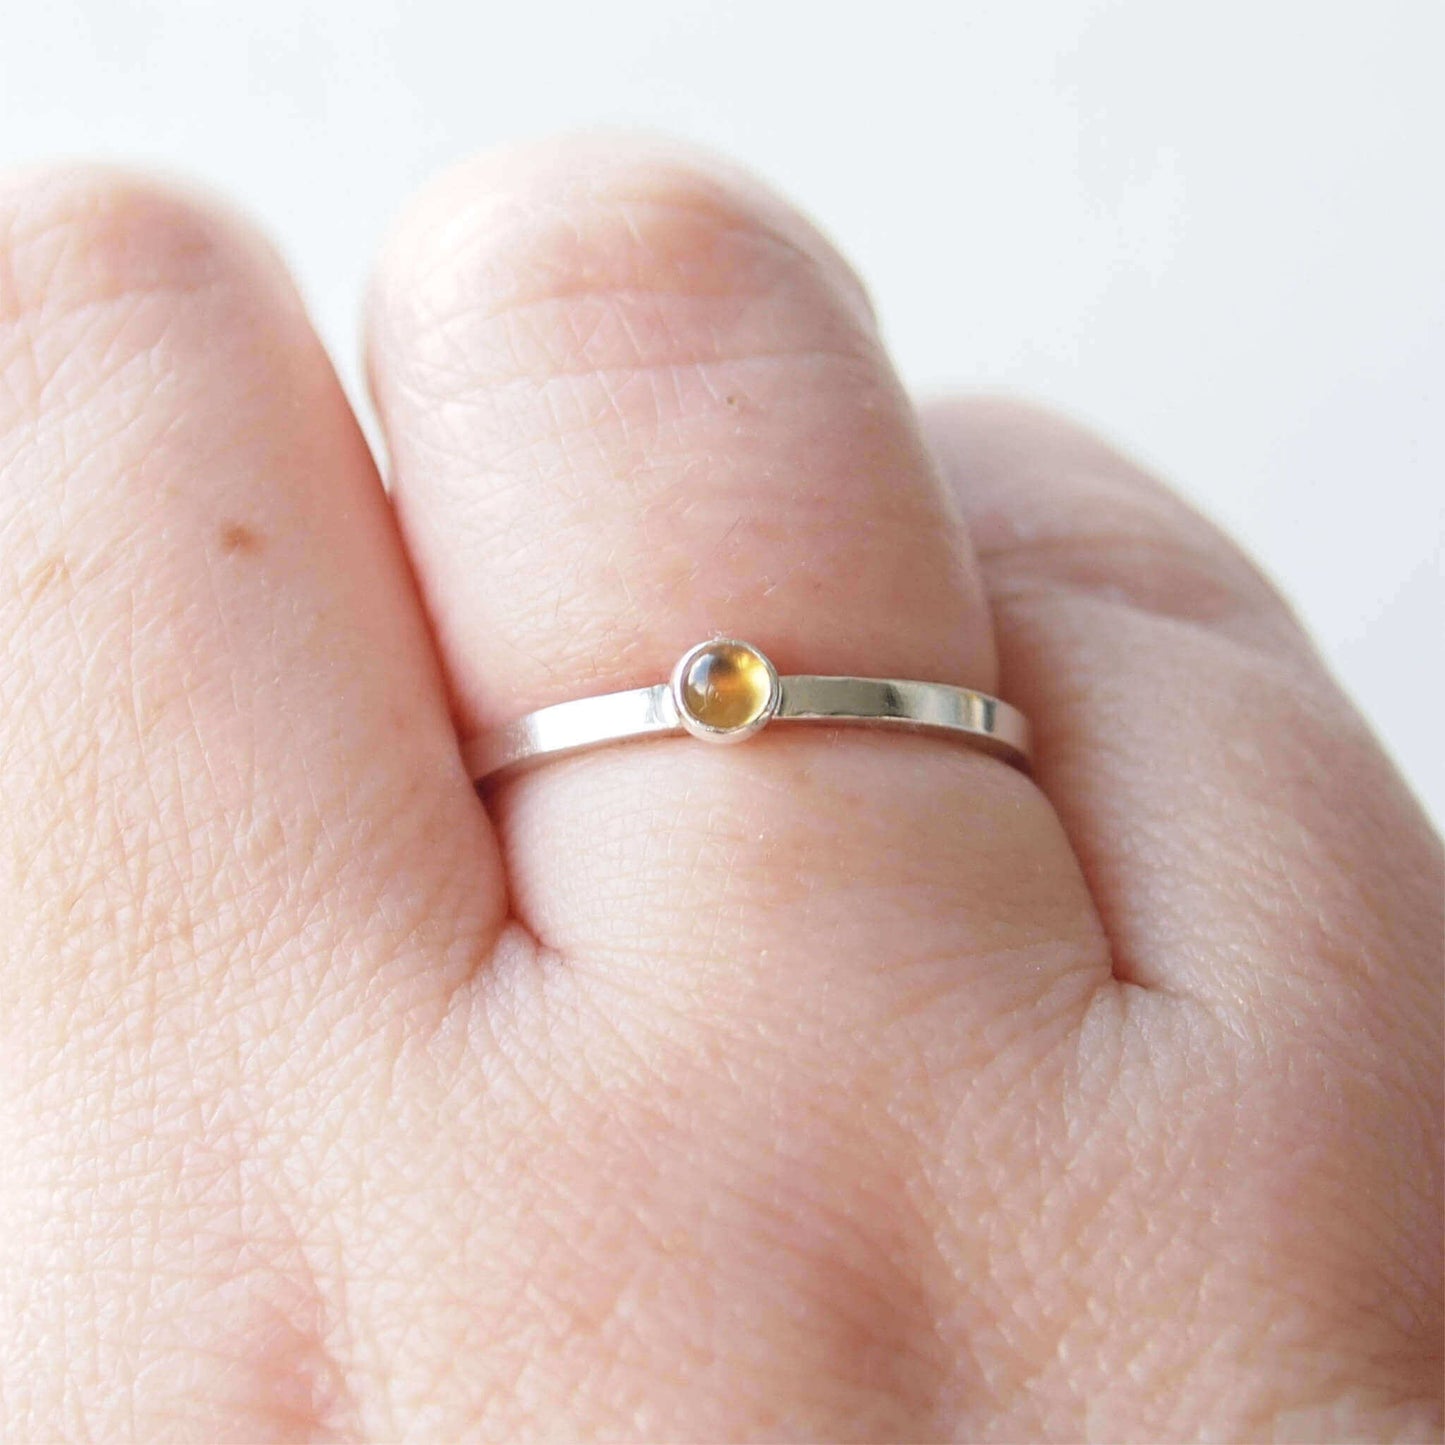 Citrine and Sterling Silver Ring made from a small 3mm round warm yellow citrine gemstone set simply onto a modern band of Square wire. Handmade to your ring size by maram jewellery in Scotland